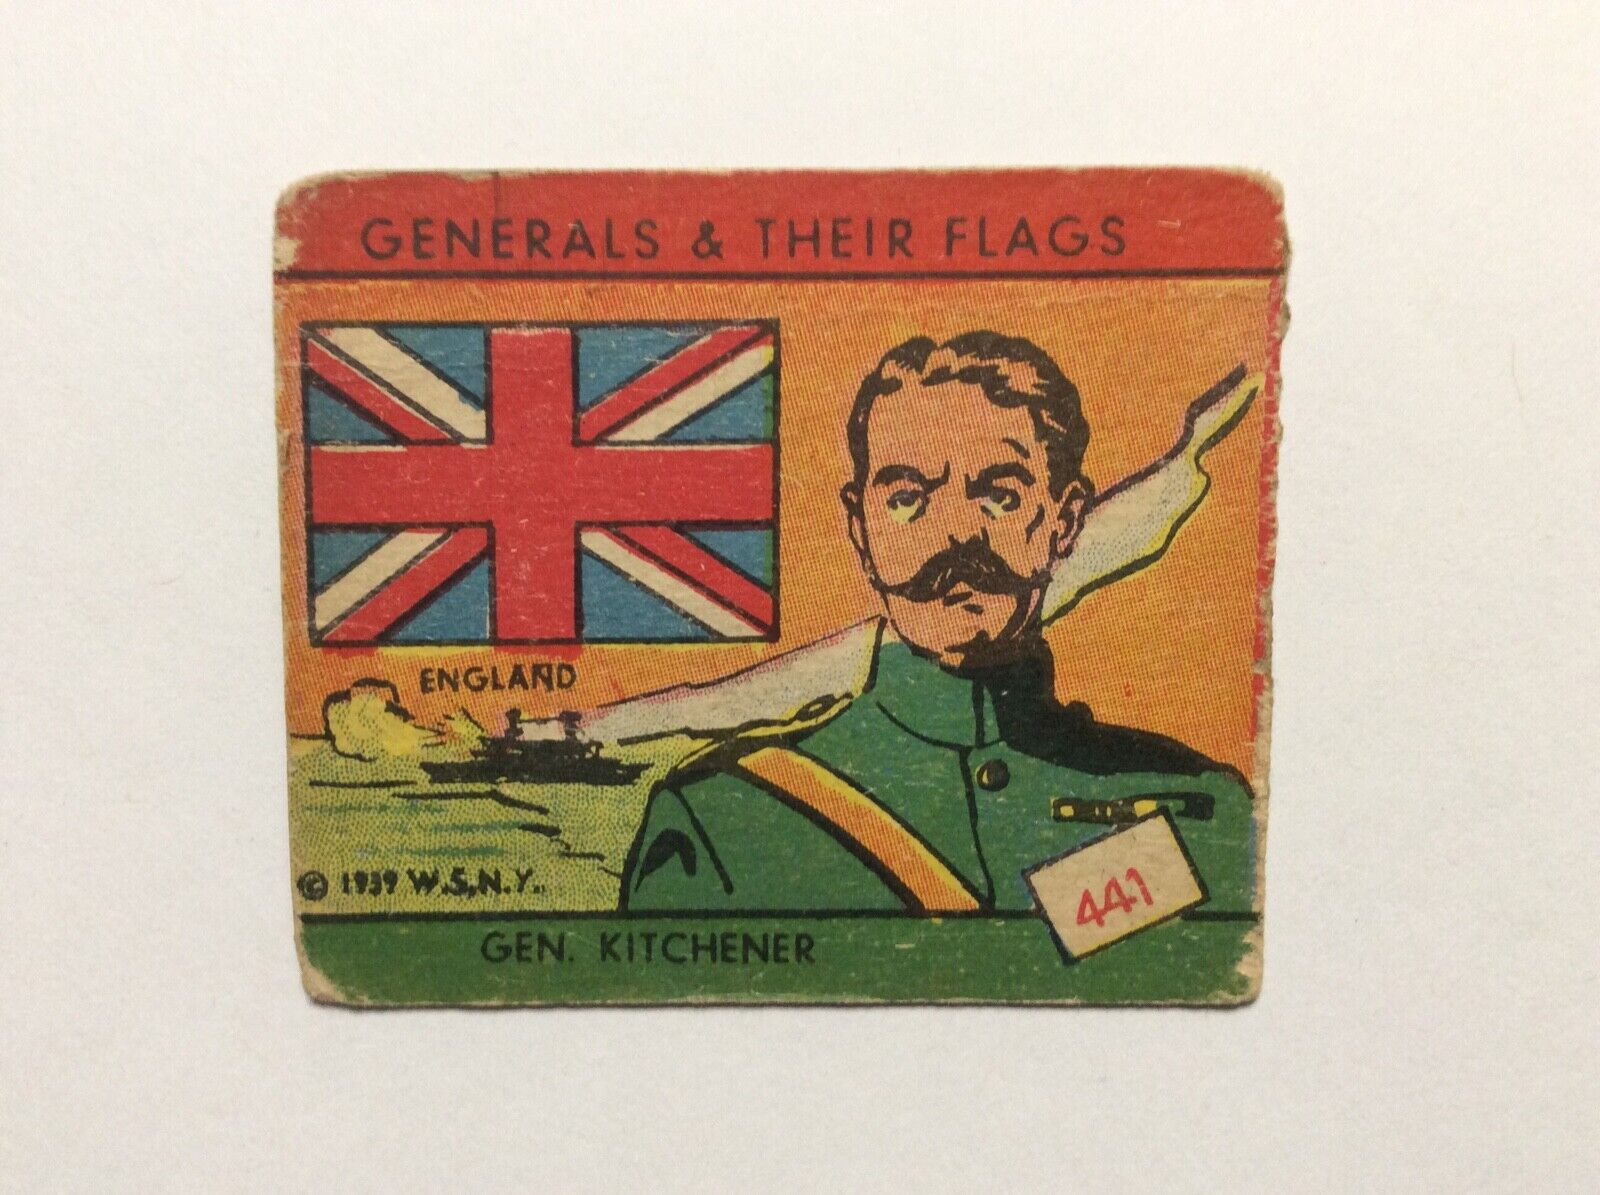 1939 R58 WS Corp Generals & Their Flags GENERAL KITCHENER England #441 Fair Cond